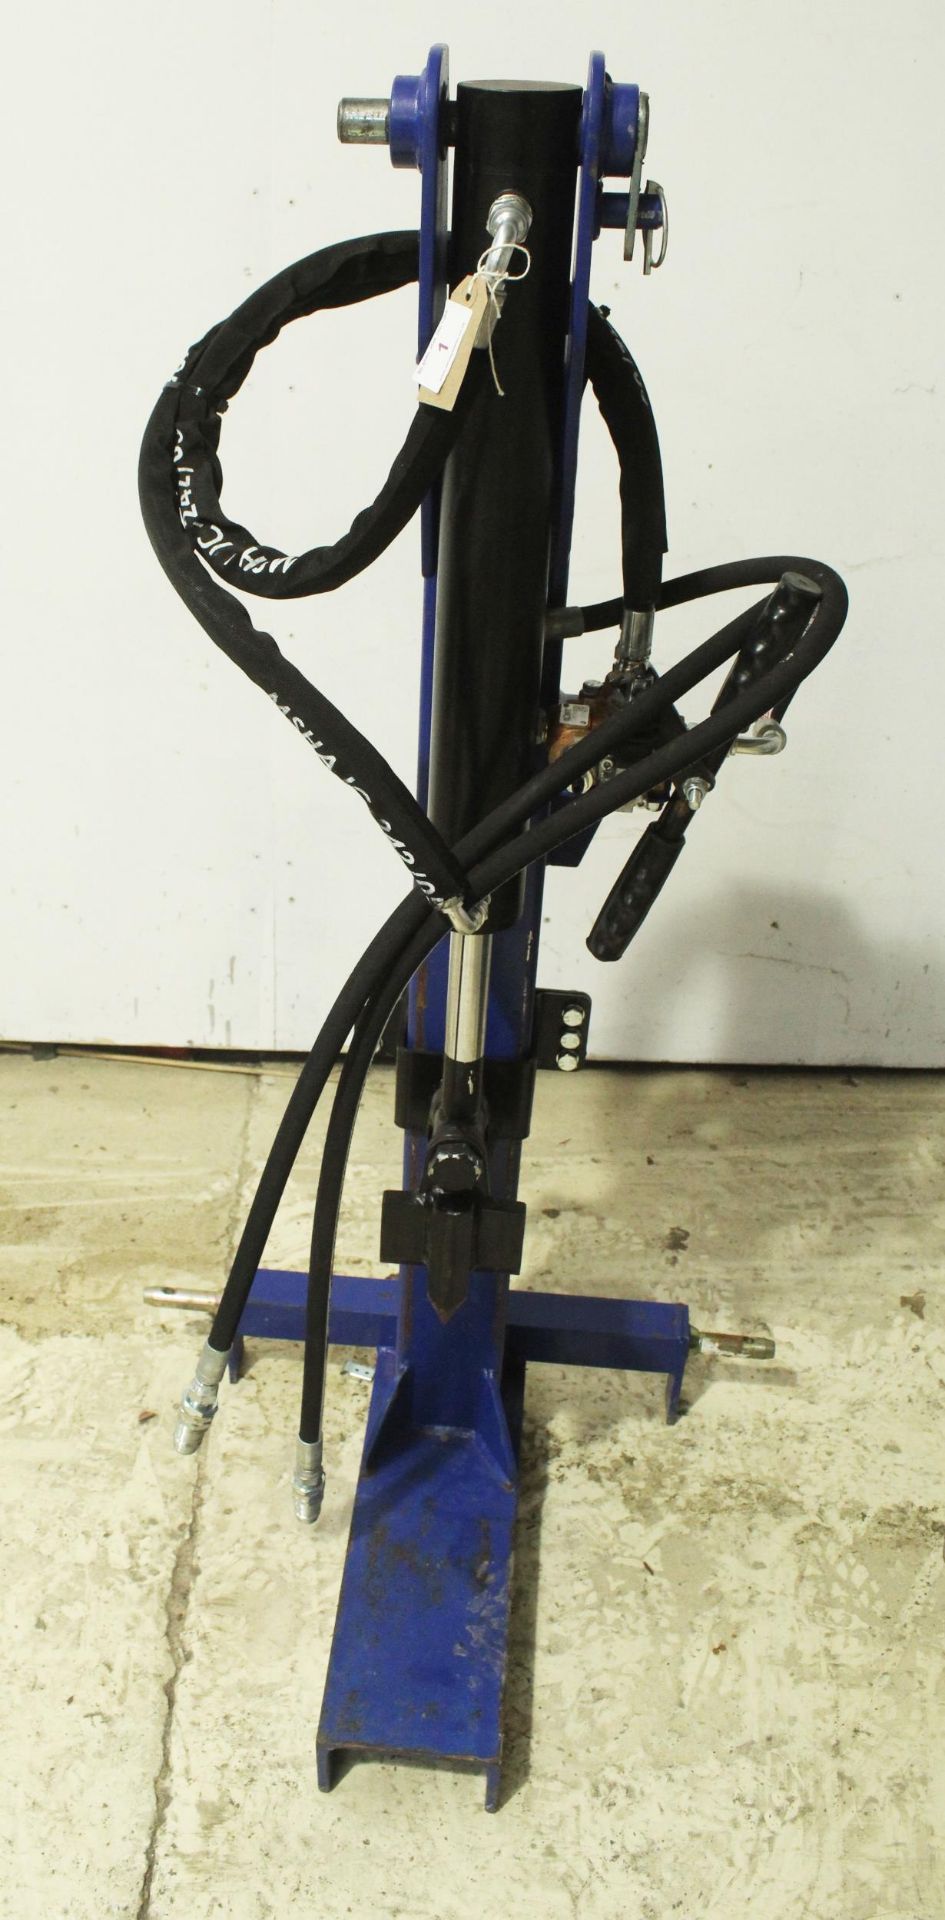 3 POINT LINKAGE HYDRAULIC LOG SPLITTER MSHA IC-242/05 IN GOOD WORKING ORDER NO VAT - Image 4 of 4